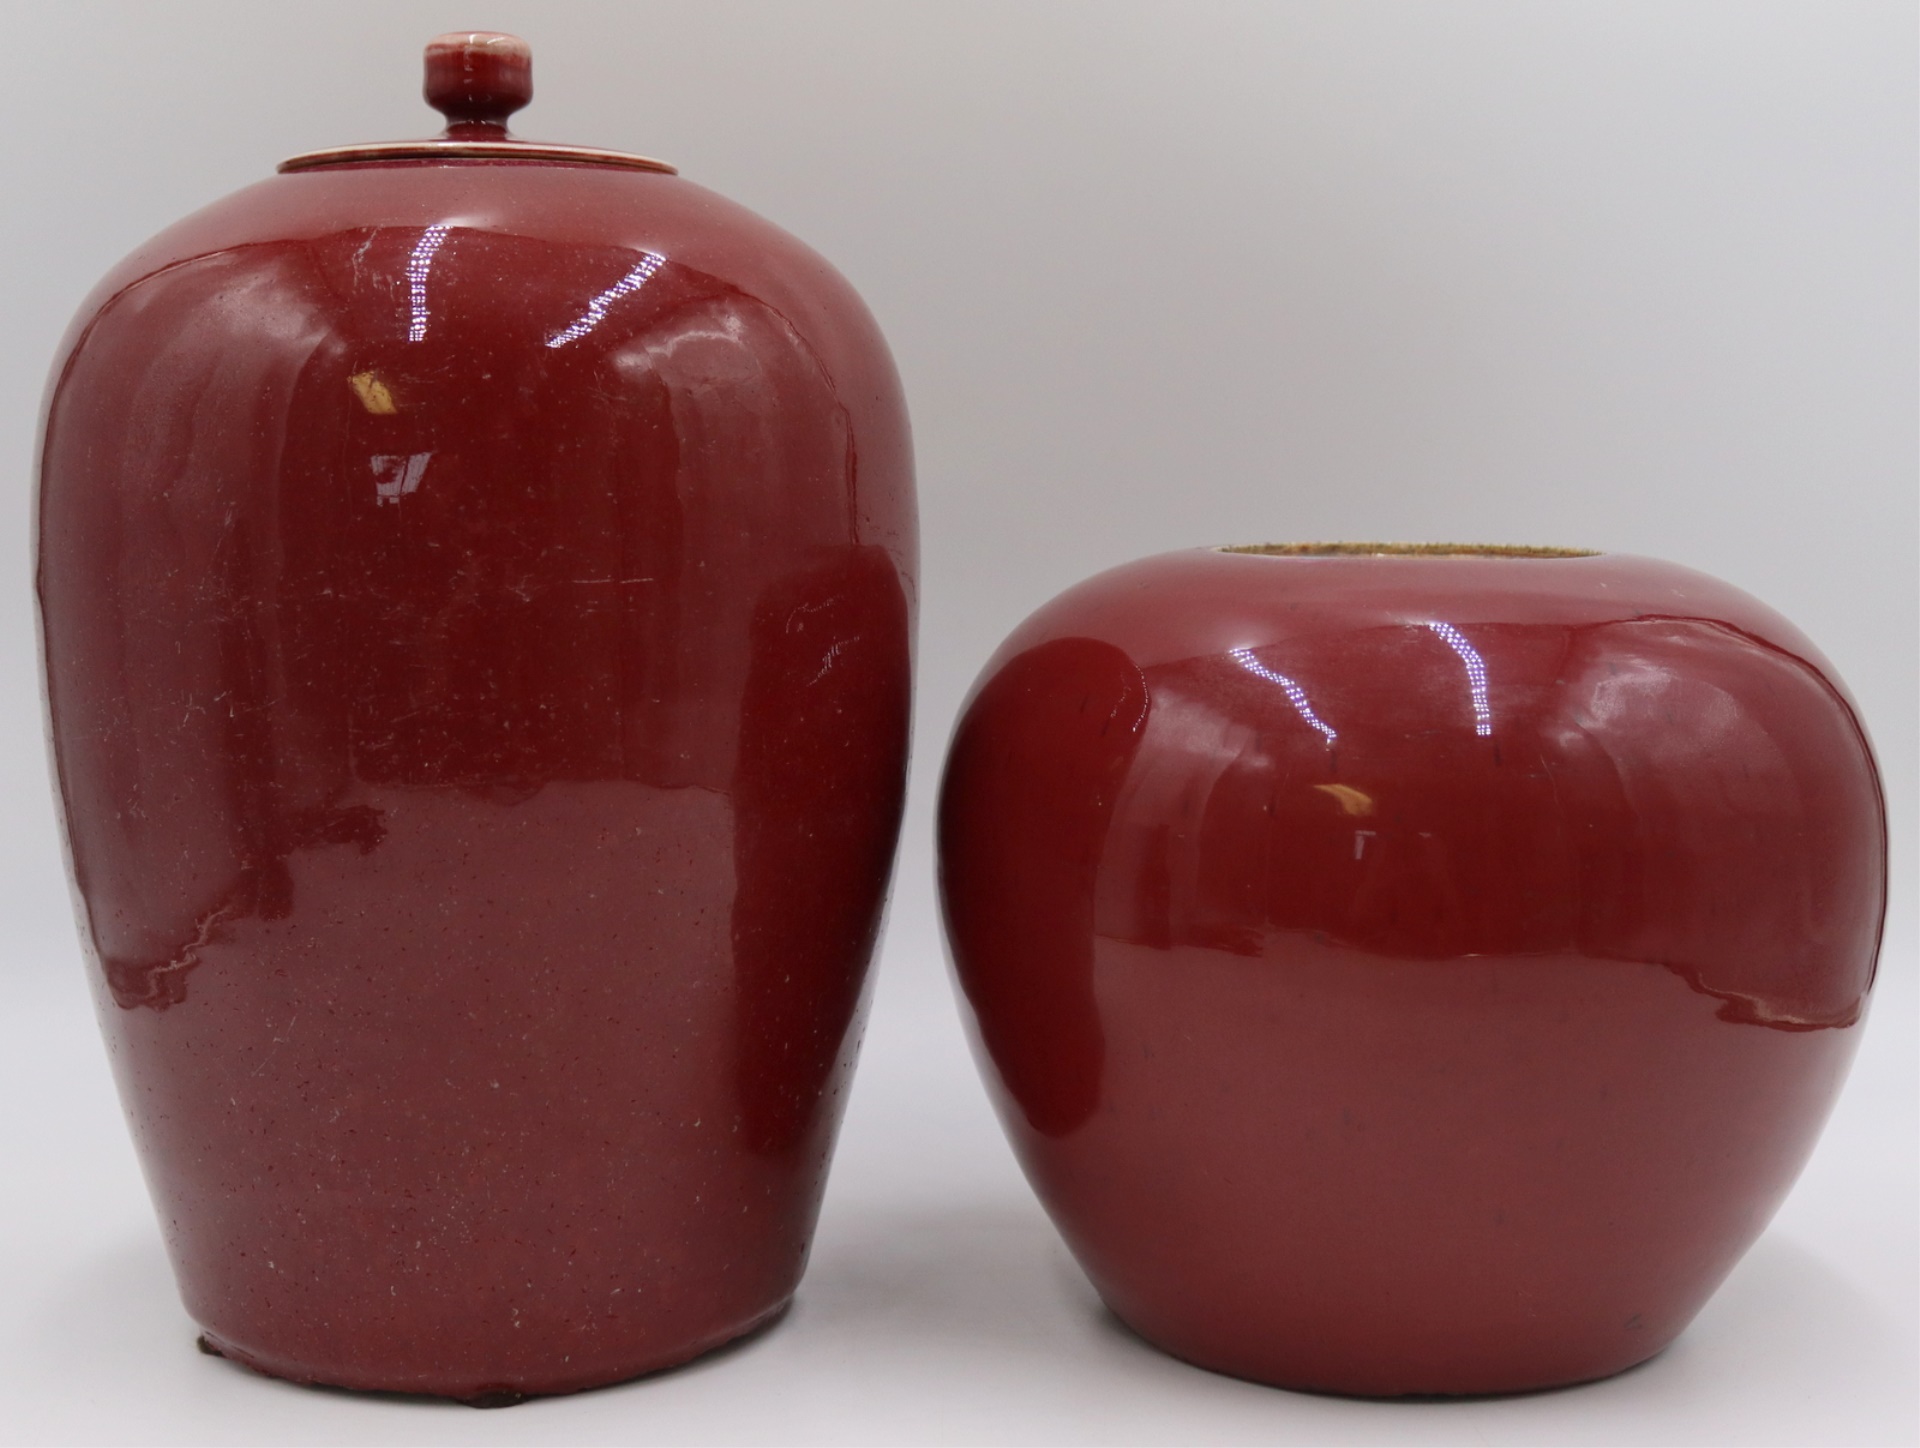  2 19TH C CHINESE FLAMBE VASES  3bde70